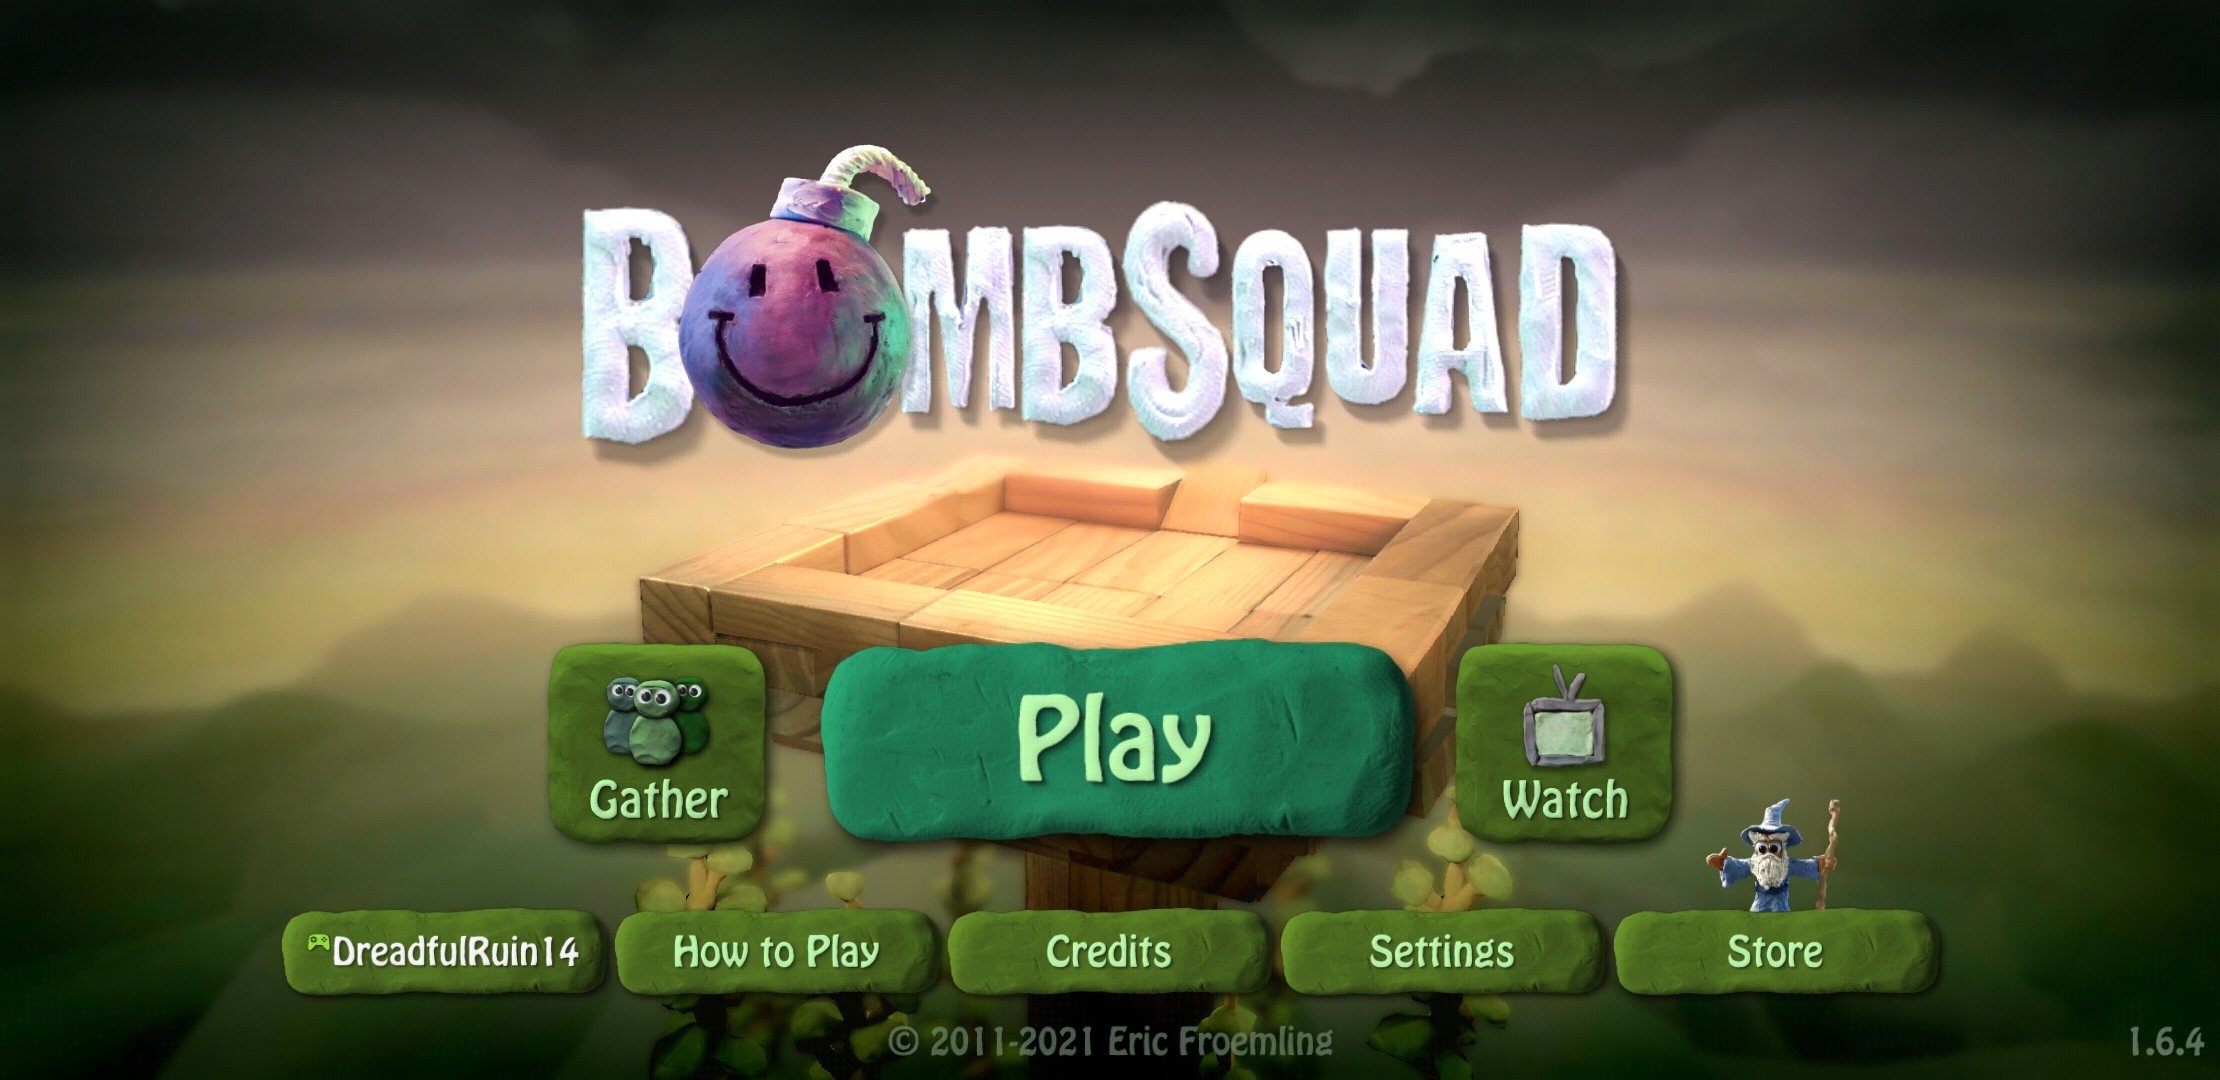 bombsquad game